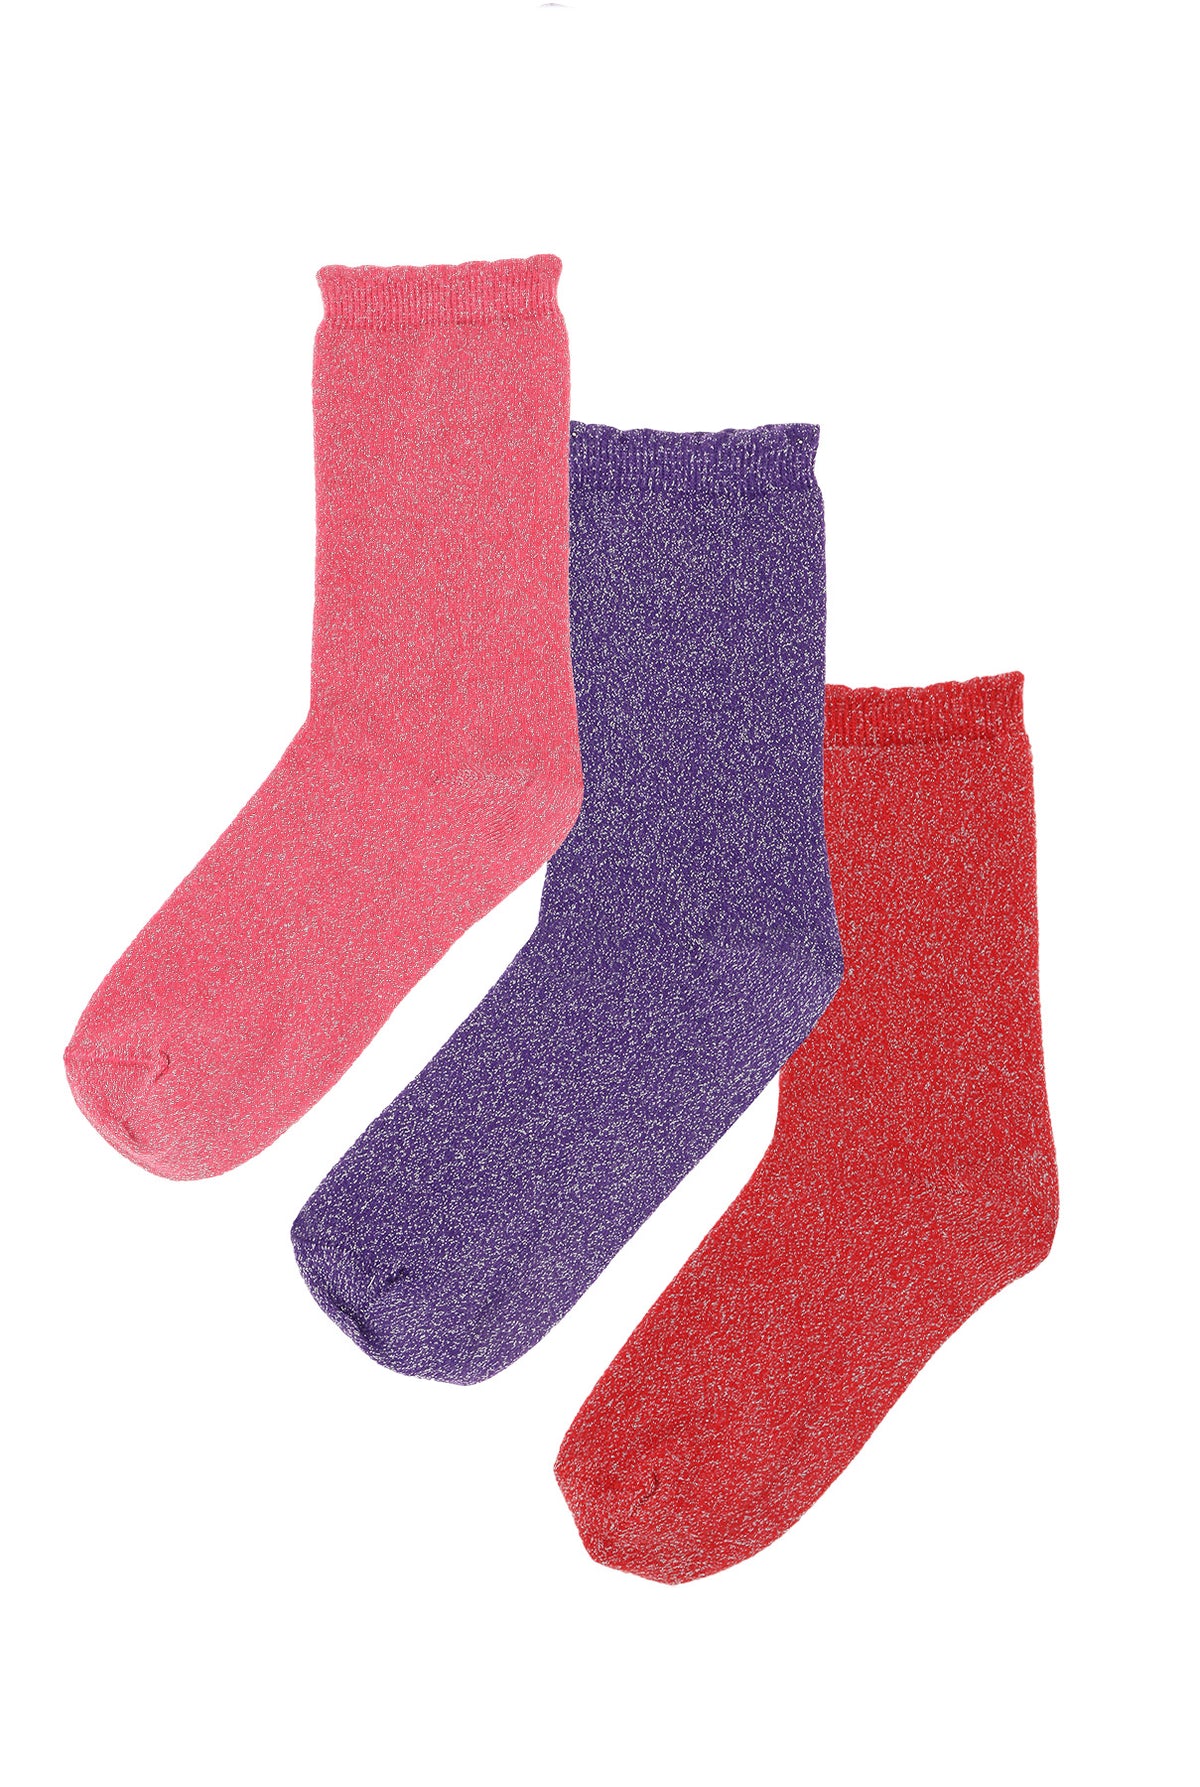 Les chaussettes blanches Besocks BeFlamingo sont disponibles Regaliz Funwear